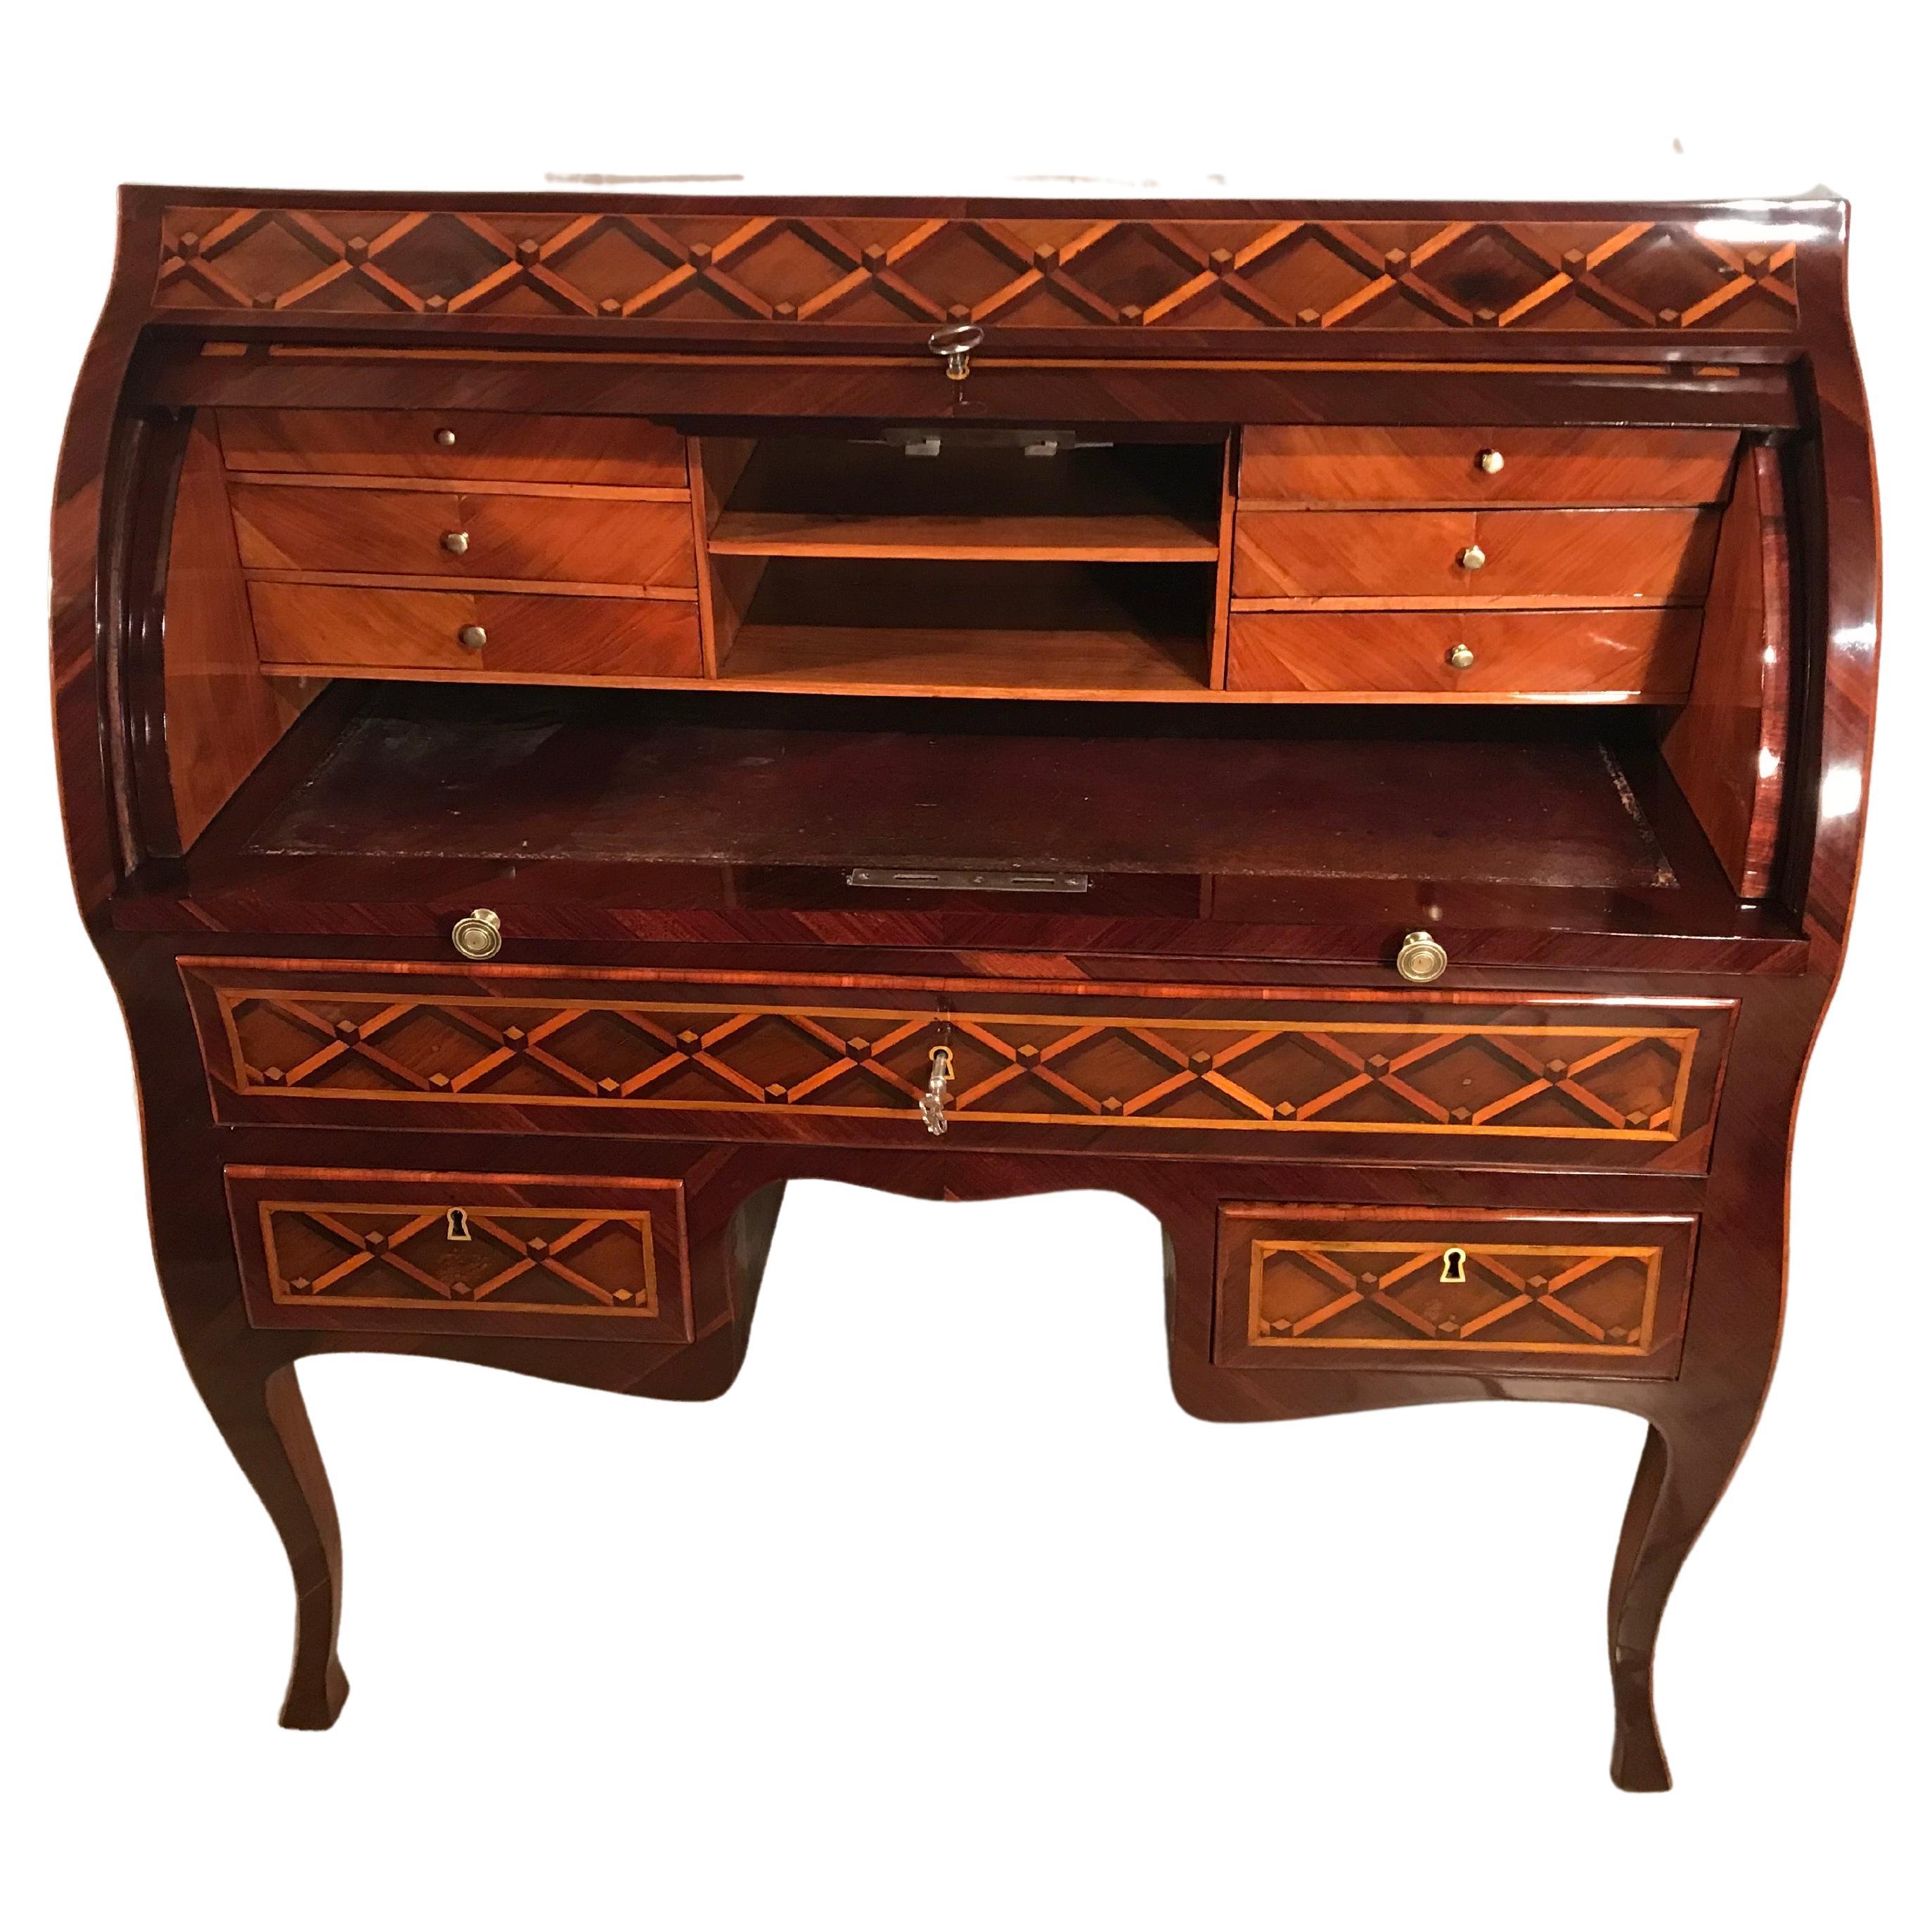 This unique Louis XVI Roll Top Desk was made in France around 1780. The outside of the secretary desk has a kingwood veneer with a gorgeous marquetry decor of diamond shaped yew wood inlays. 
The writing surface is covered with green leather. Inside